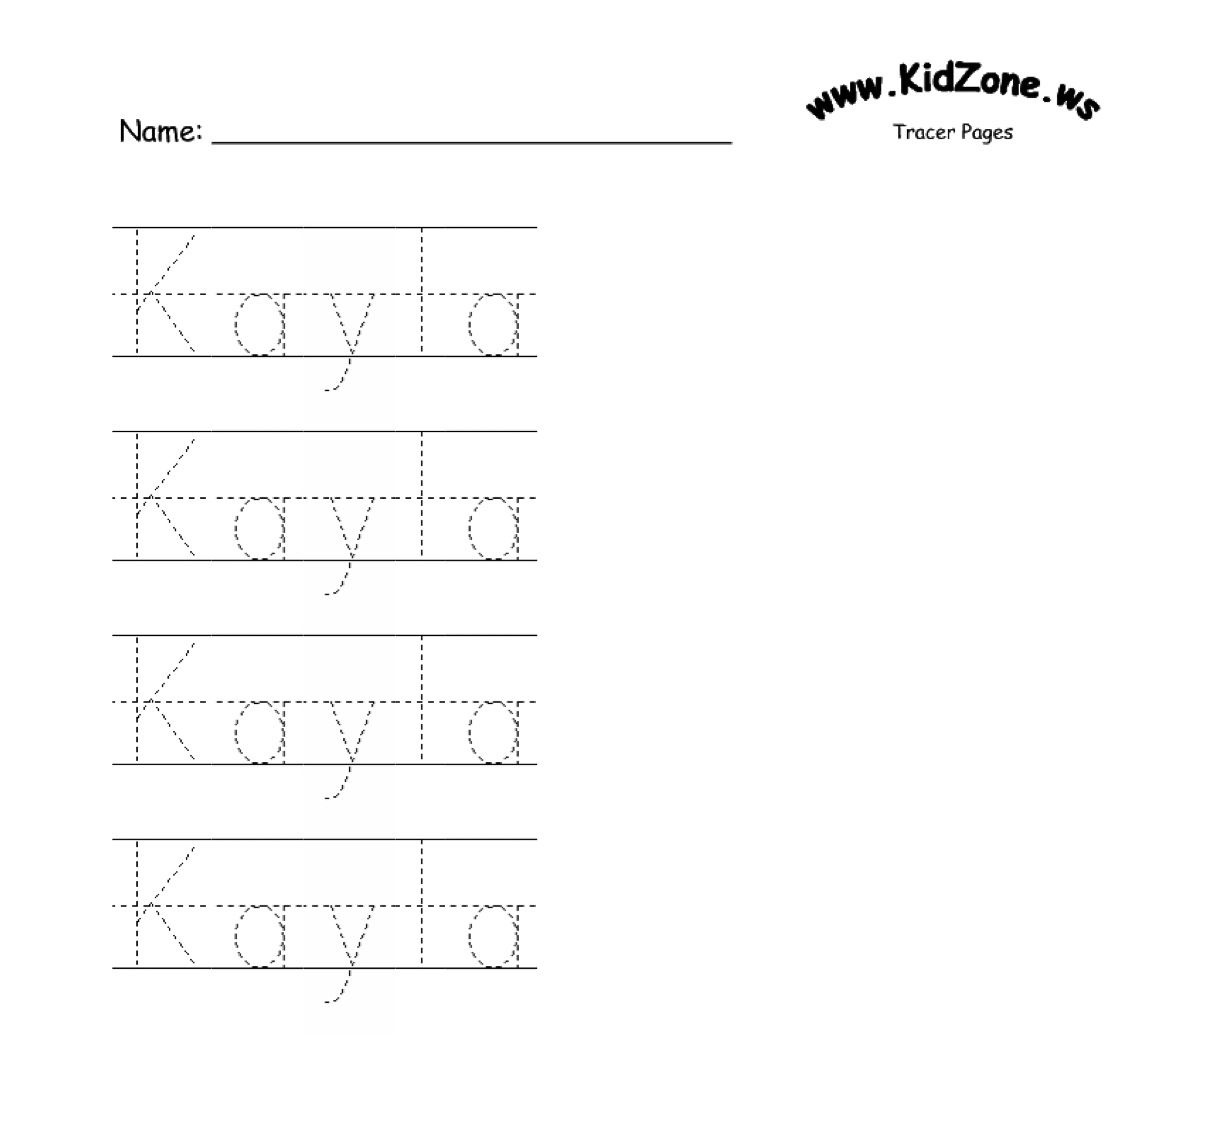 Custom Name Tracer Pages | Name Recog | Preschool Names, Preschool - Free Printable Preschool Name Tracer Pages